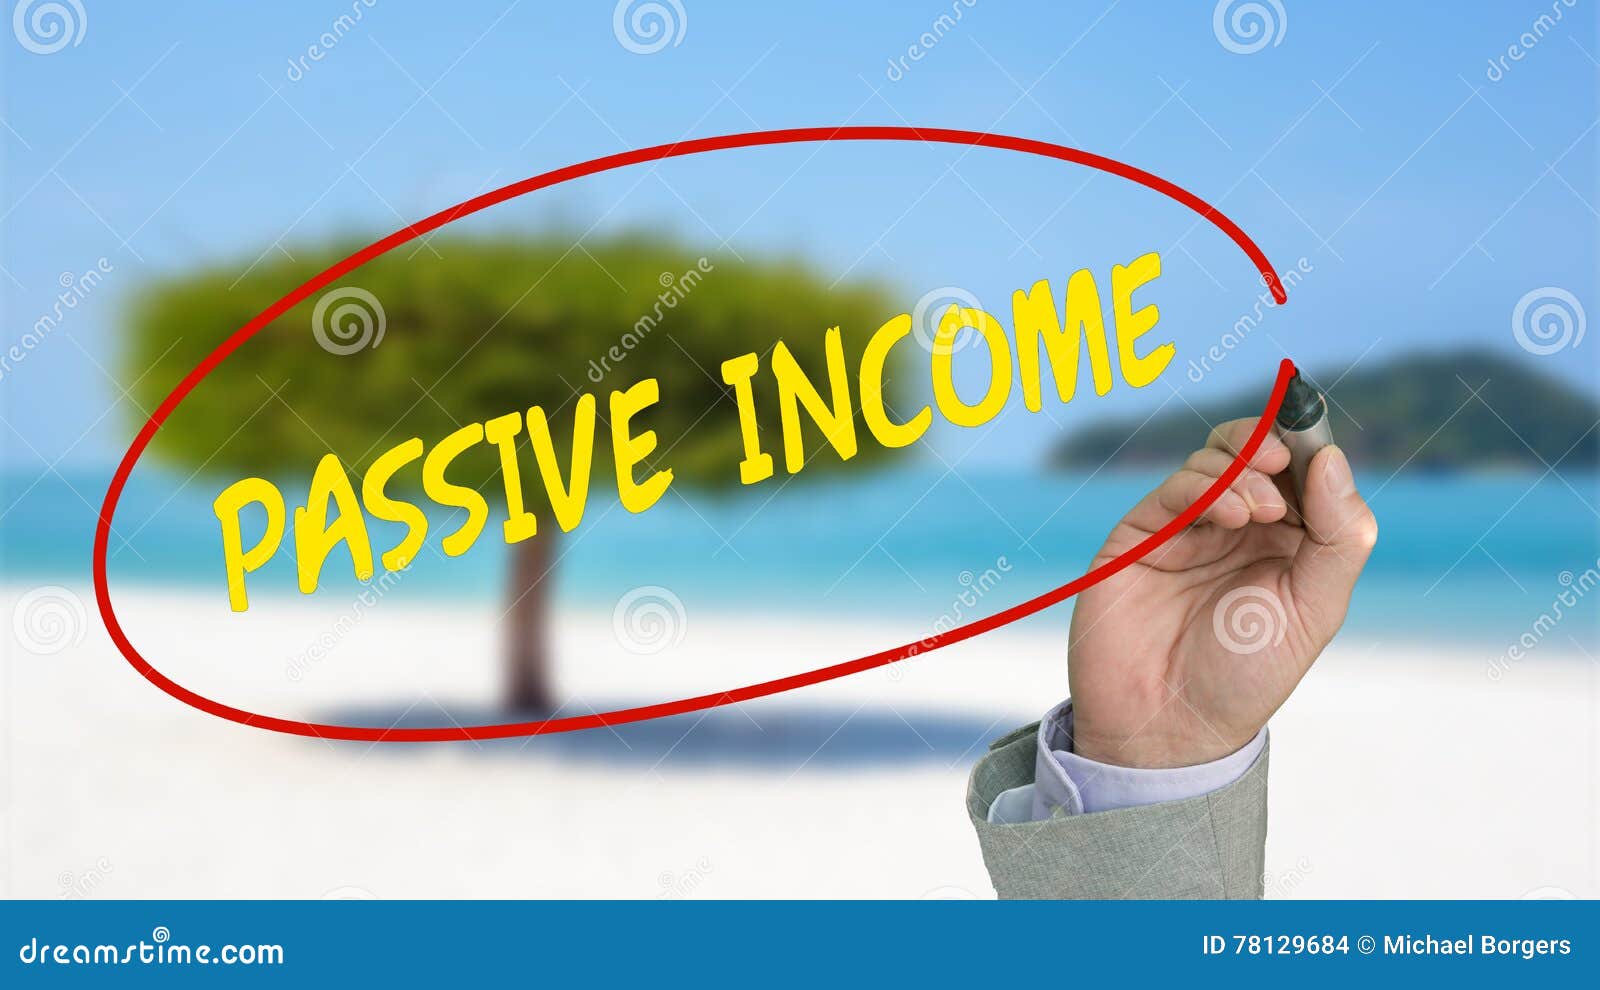 work from anywhere passive income concept